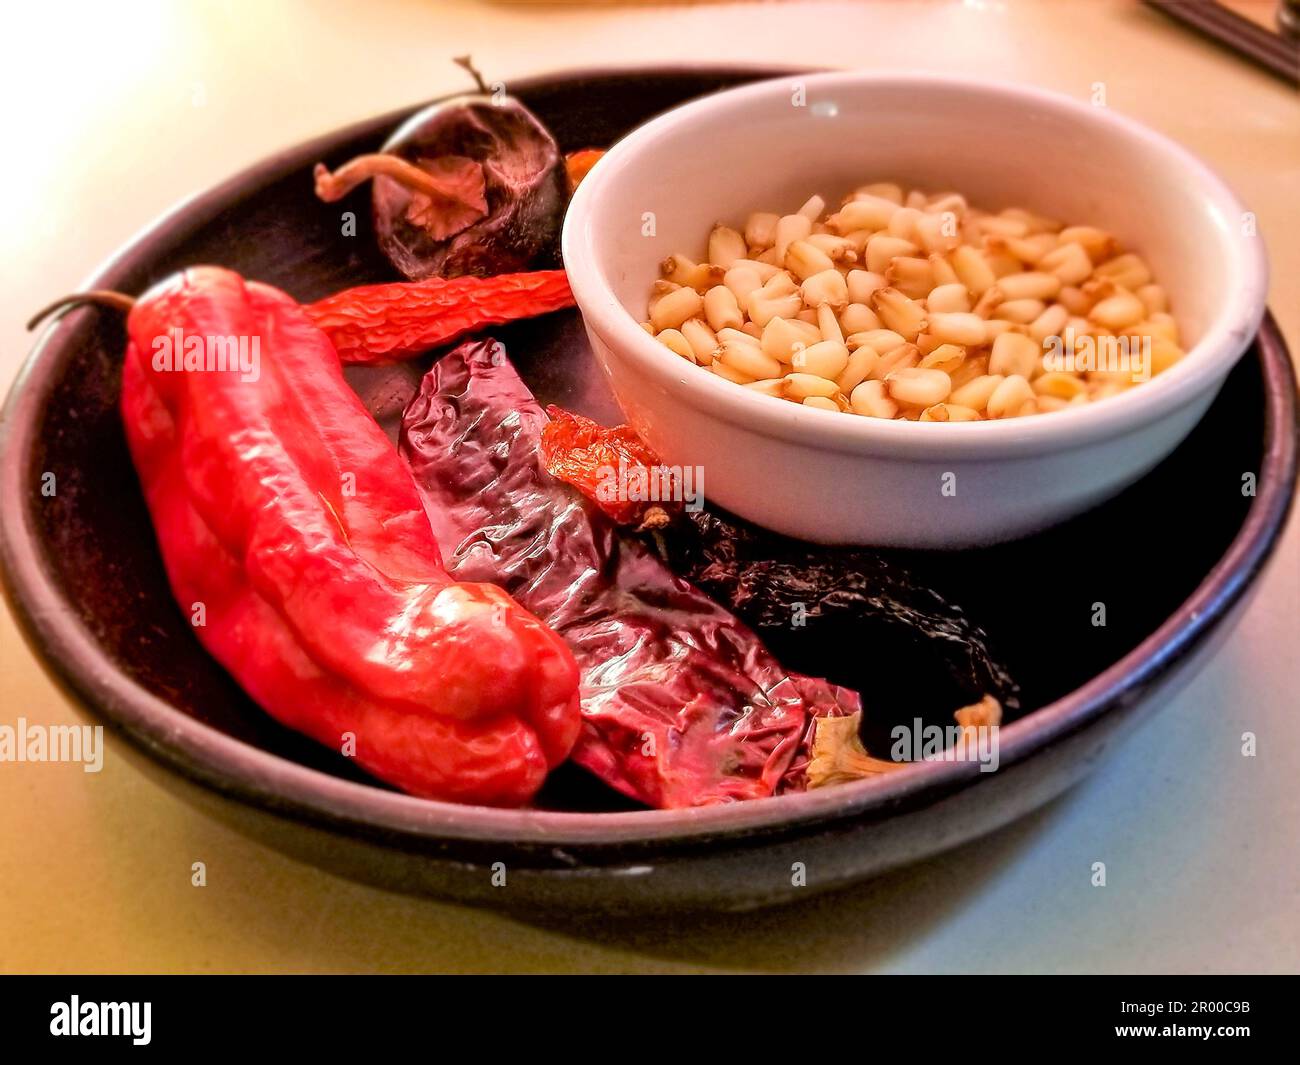 Chilis aand Posole are Staple Southwest Ingredients for Southwest Cuisine Stock Photo